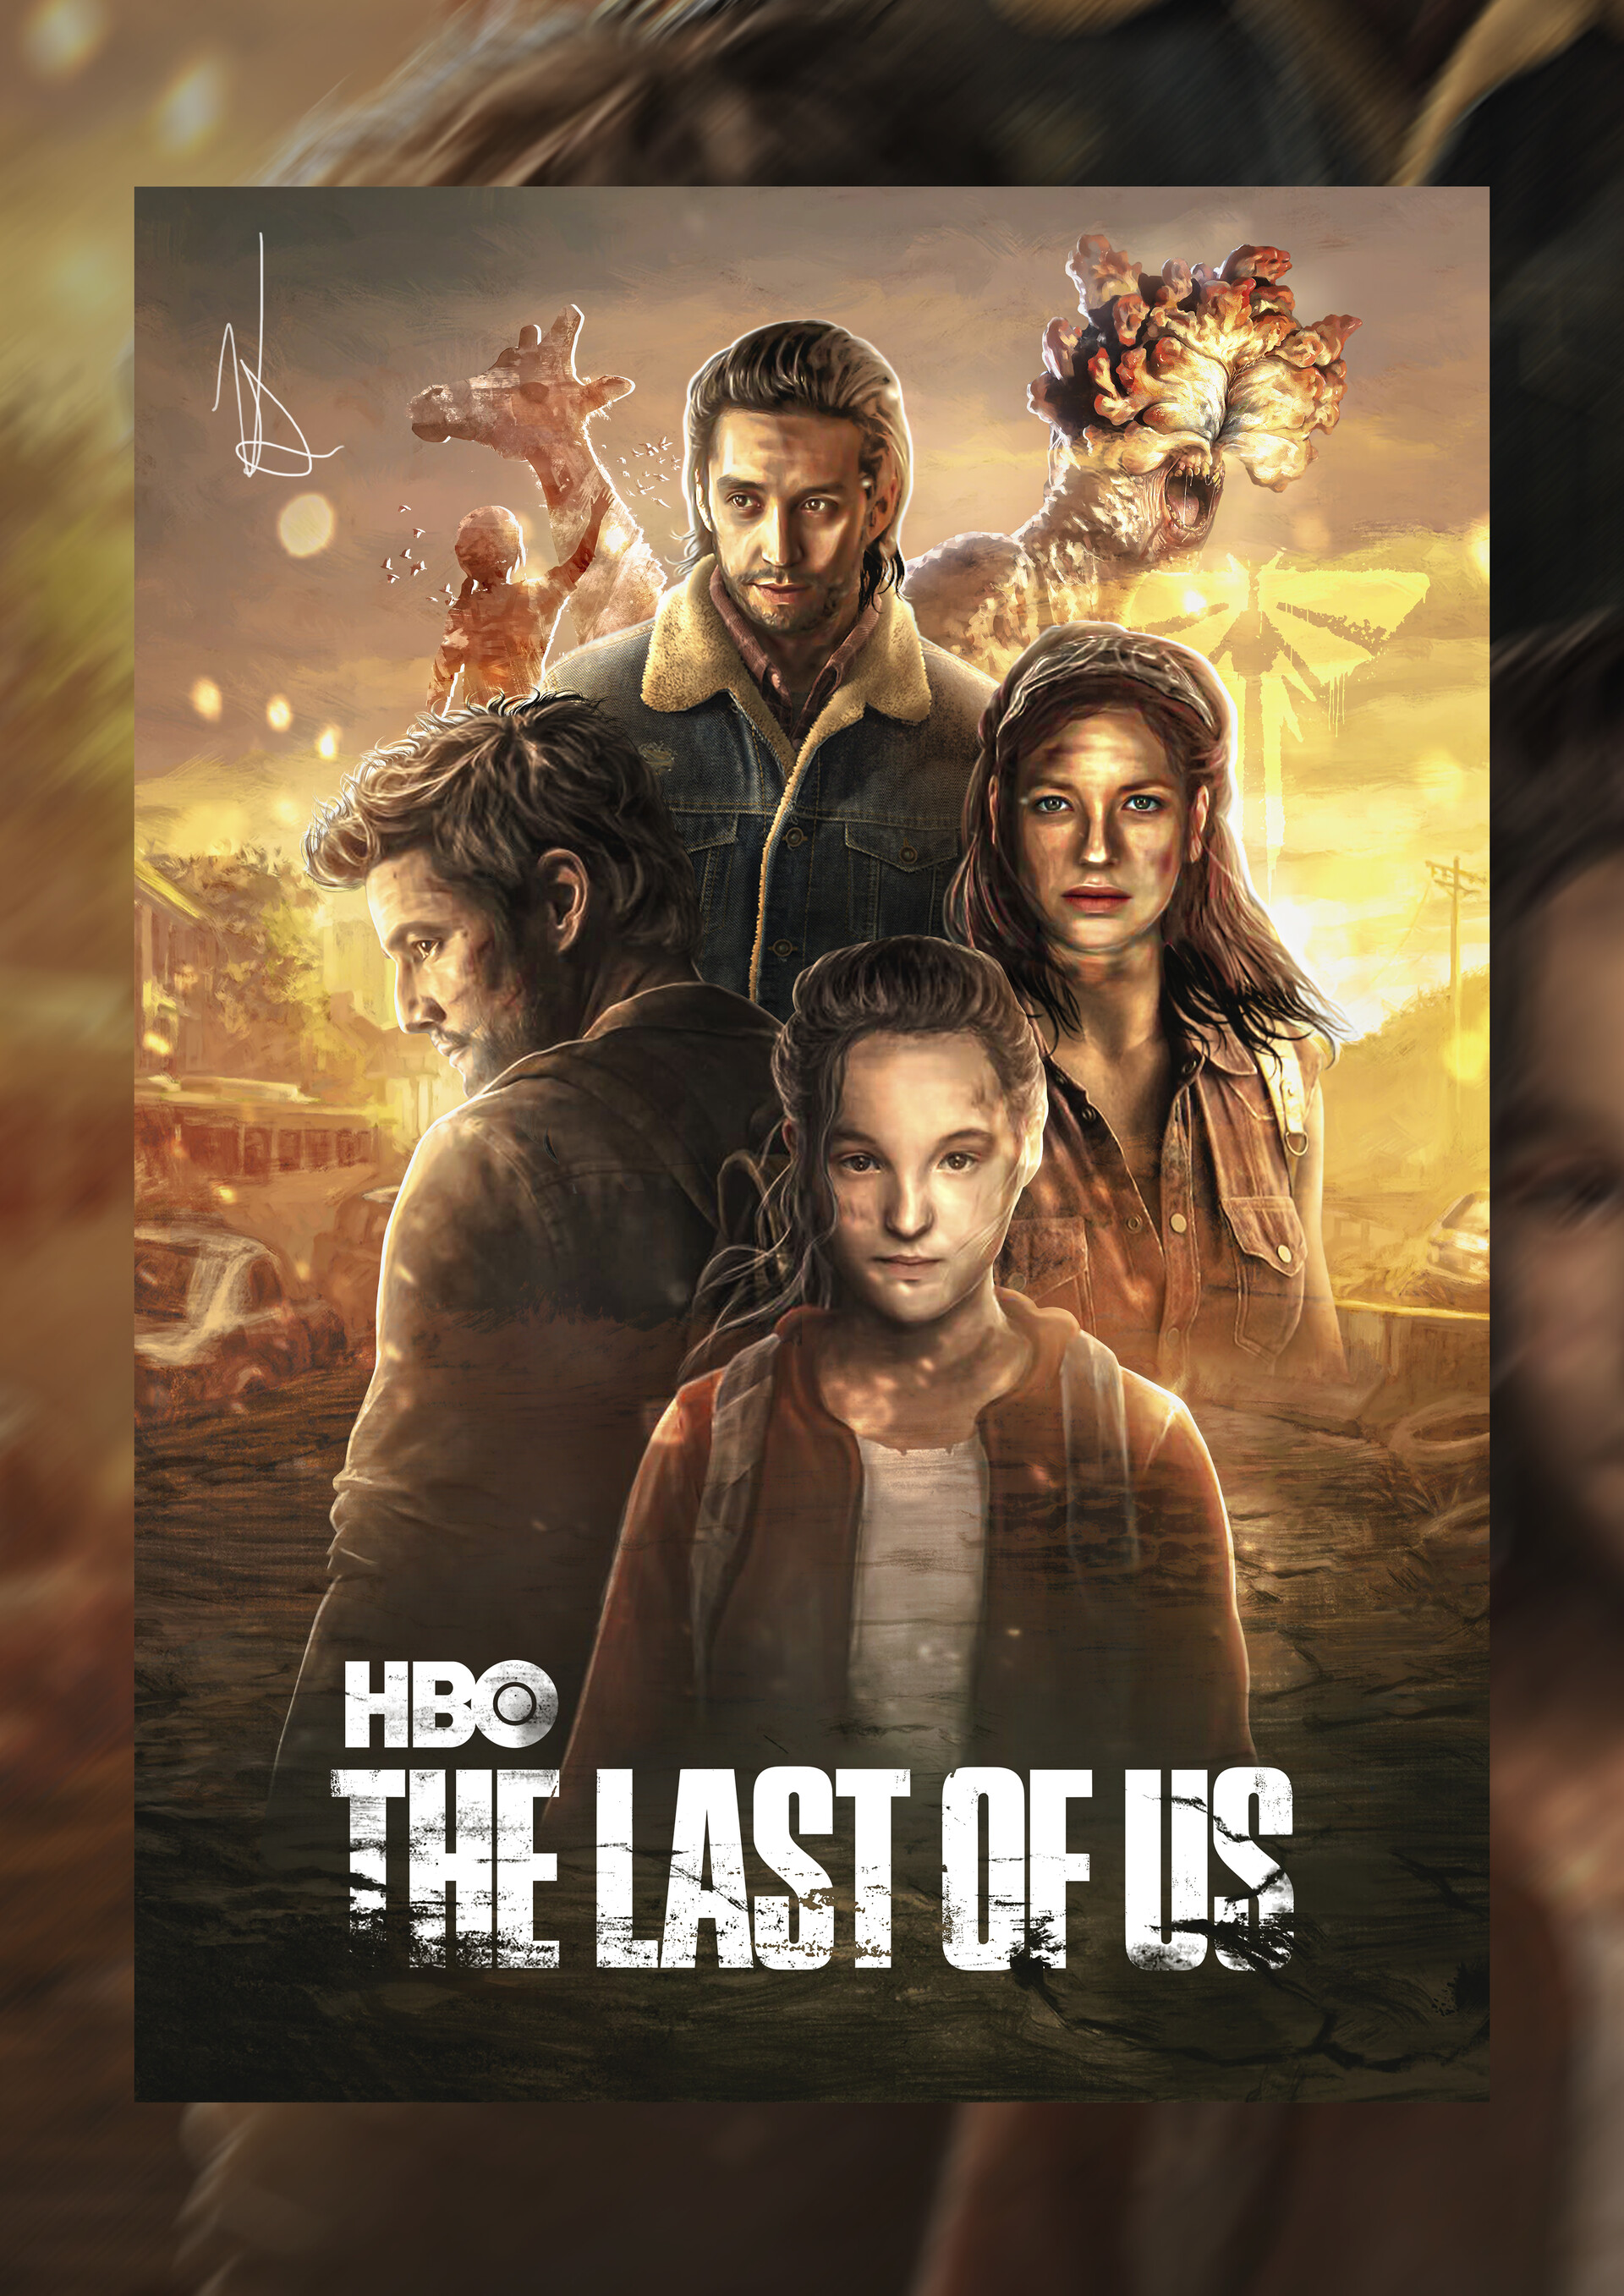 ArtStation - The Last Of Us HBO - Concept Poster